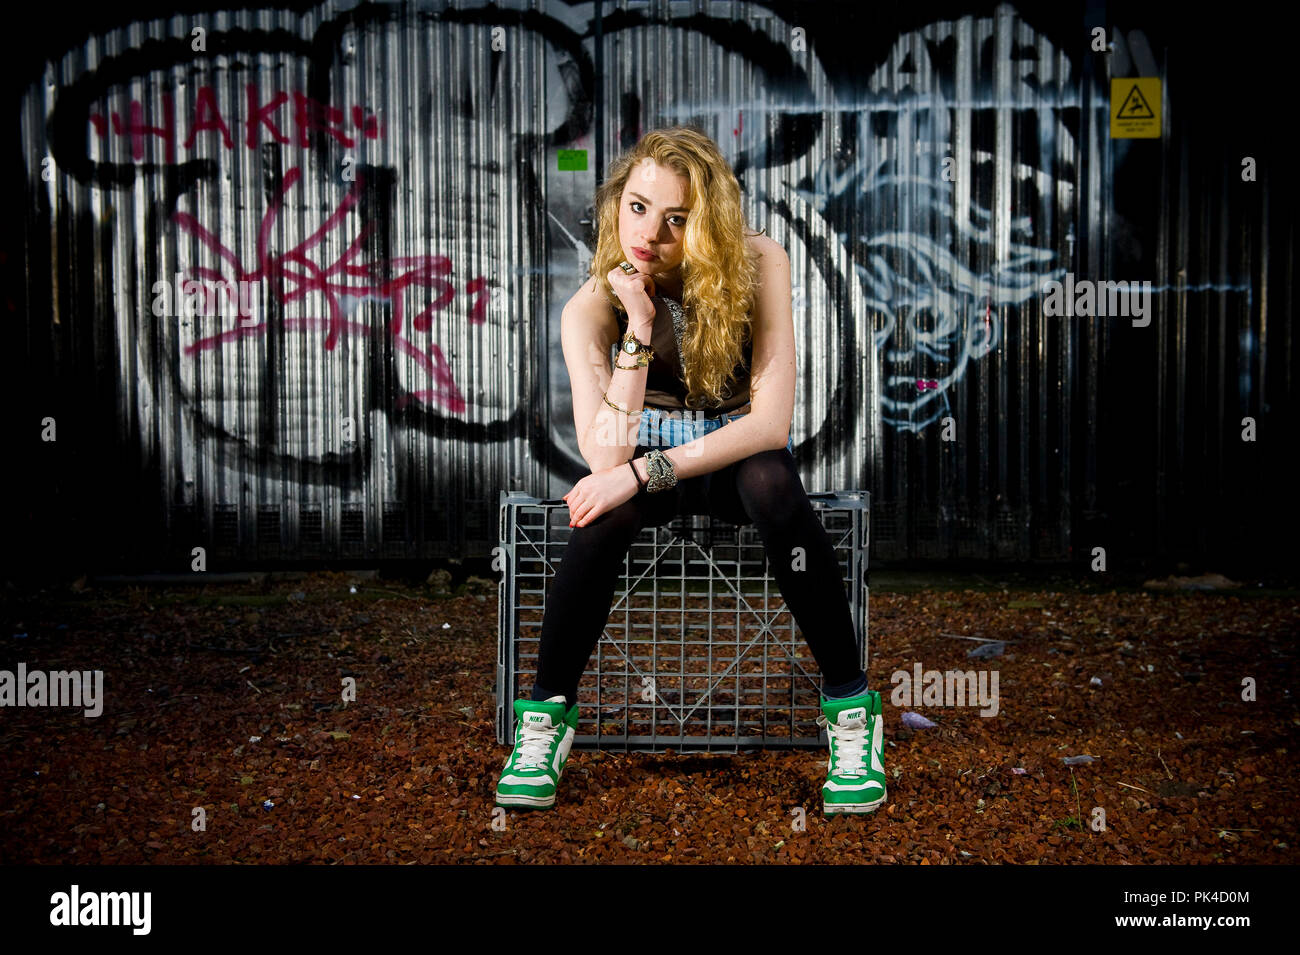 Edinburgh born Actress Freya Mavor has landed a lead role in the new series of Skins. Stock Photo